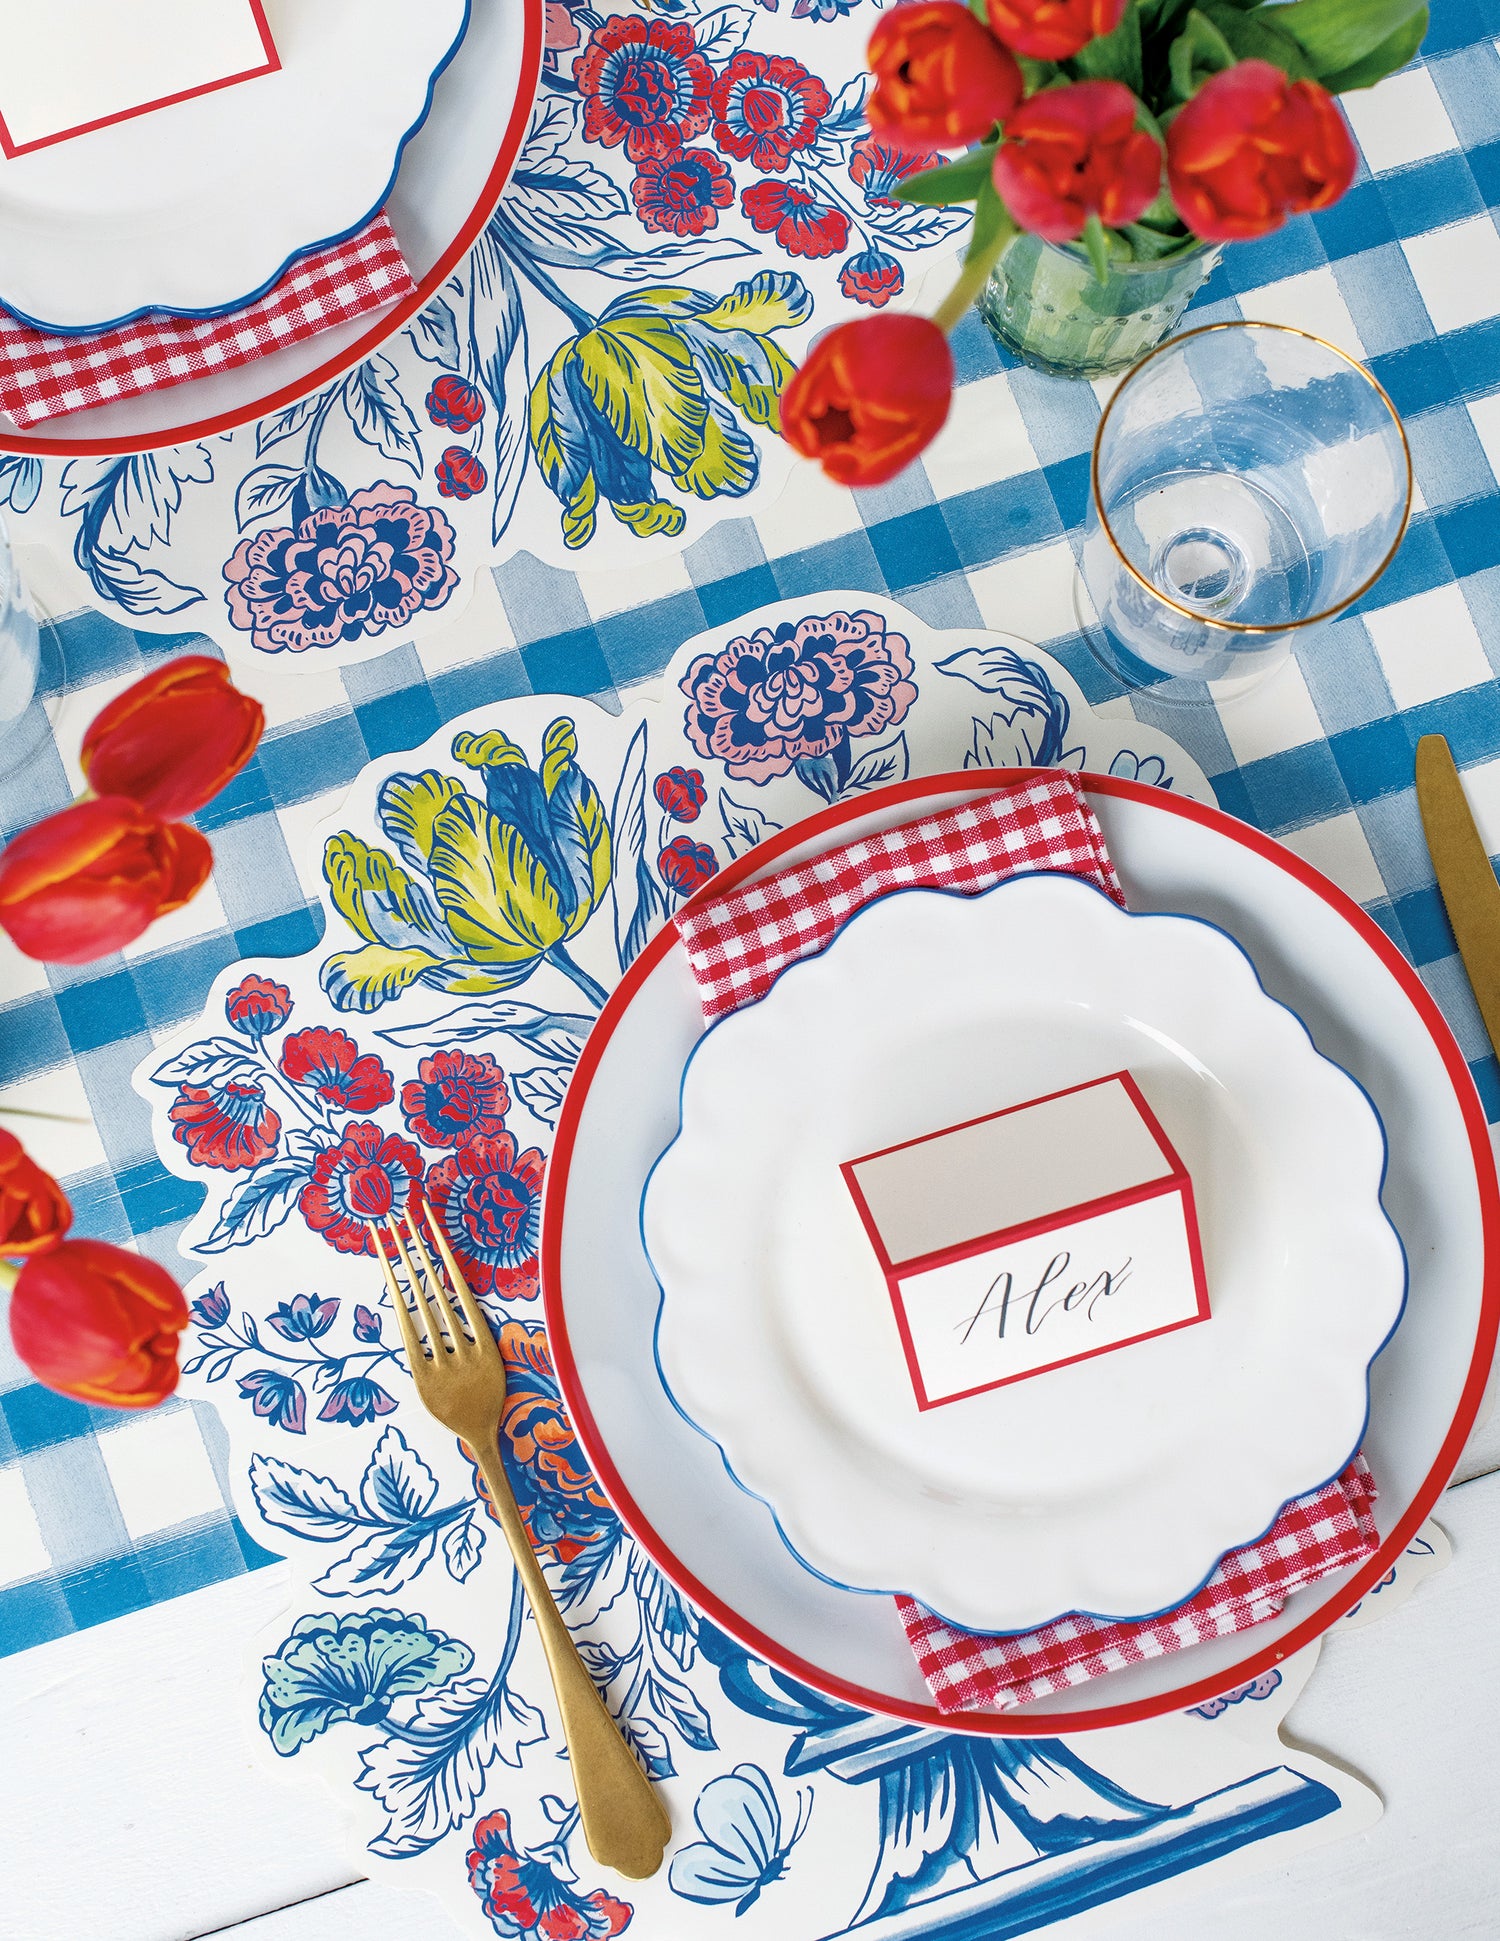 A Blue Painted Check Runner under an elegant floral table setting, from above.